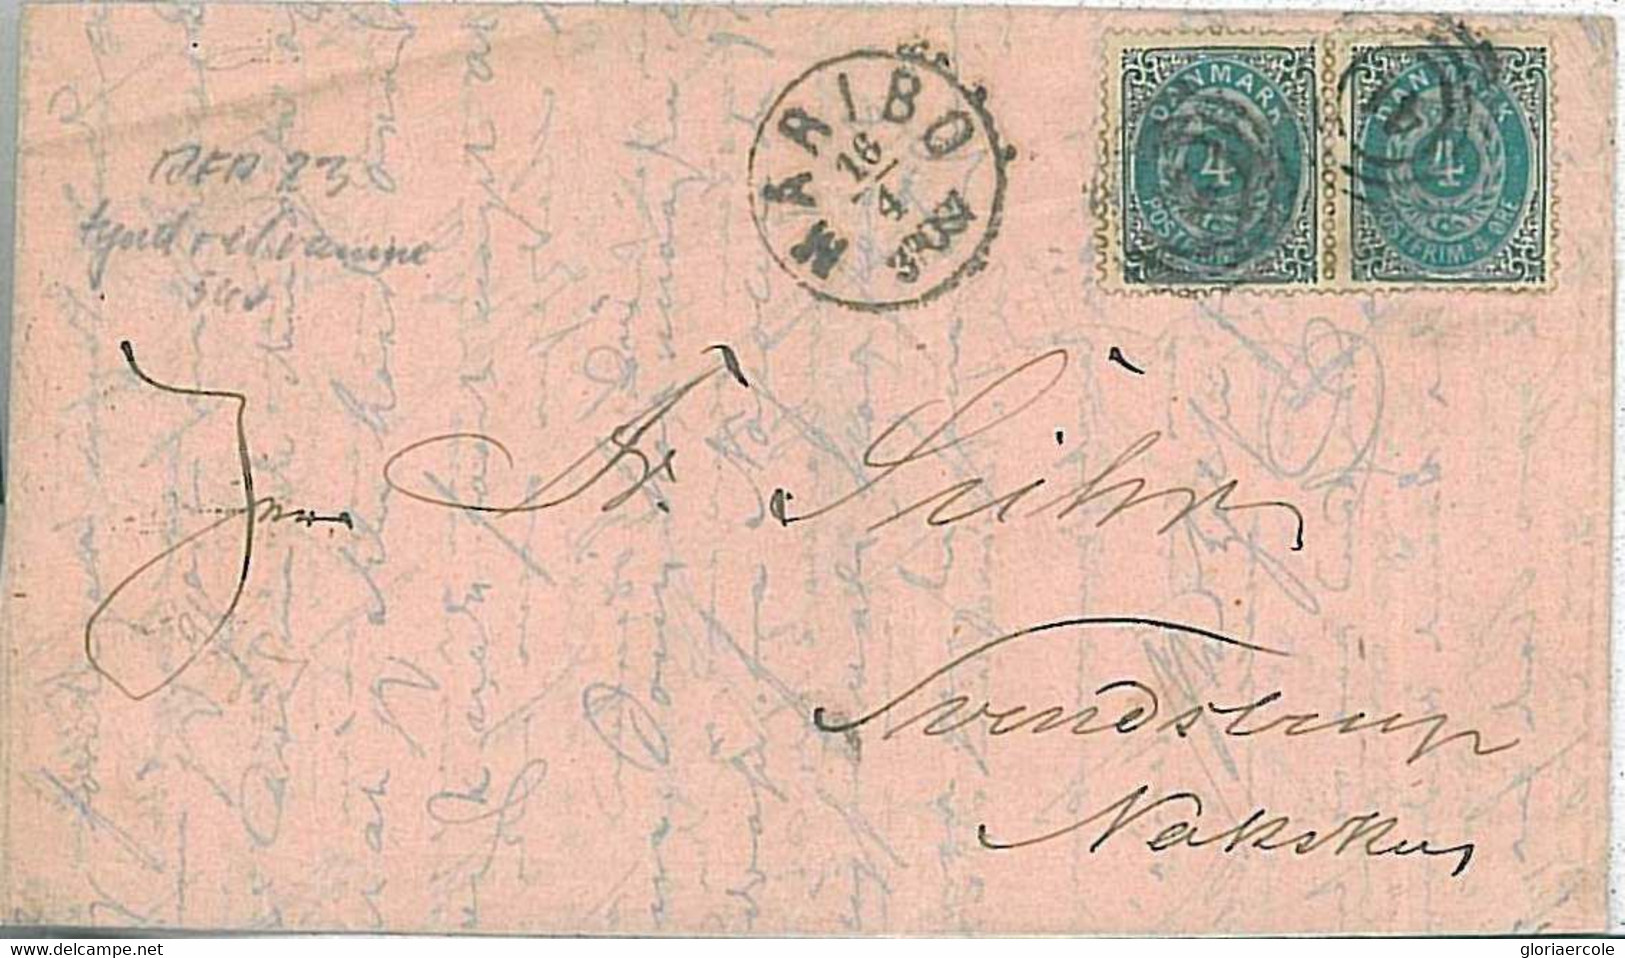 27229  - DENMARK  - Postal History - COVER From MARIBO 1883 - FULL CONTENTS - Covers & Documents